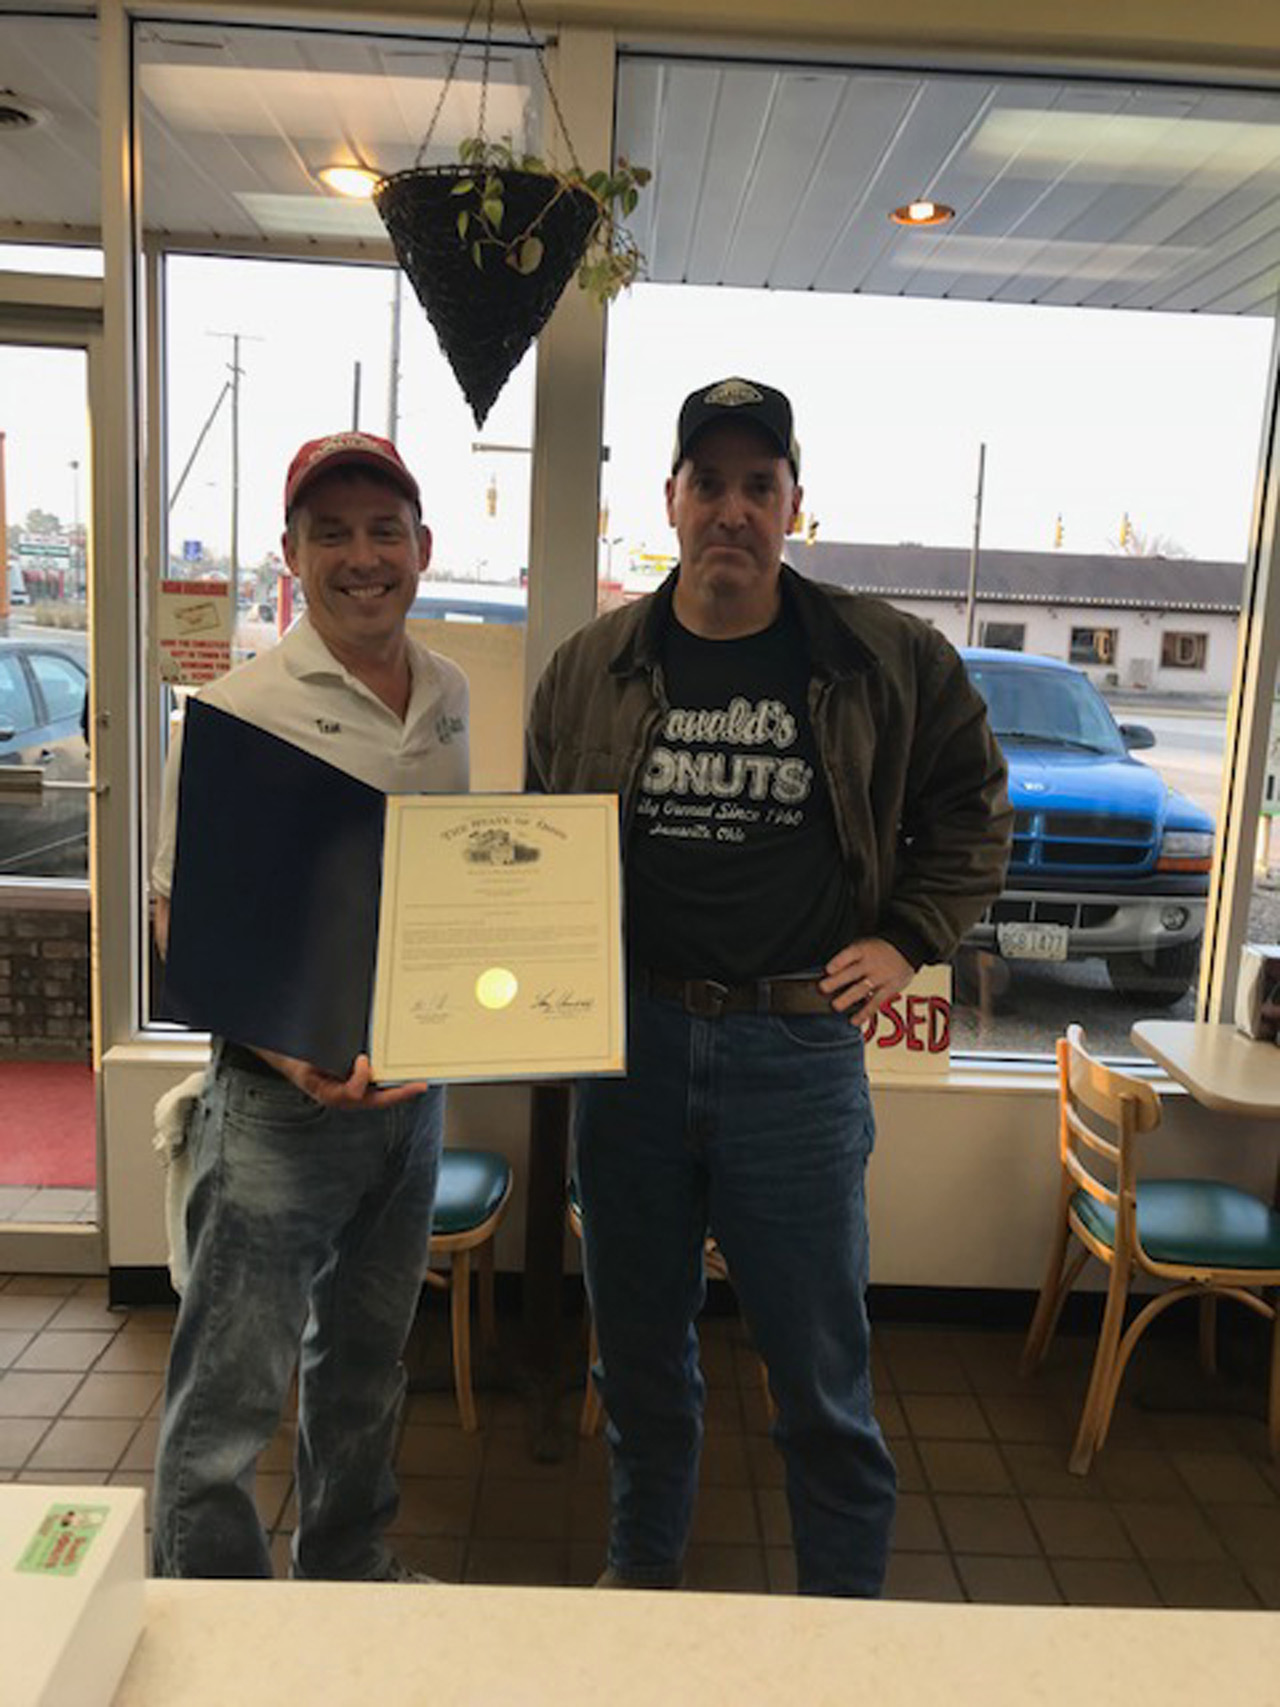 Rep. Holmes smiles alongside Donald's Donuts owner Tom Warne. Rep. Holmes presented Mr. Warne with a commendation for the businesses' 60th anniversary.